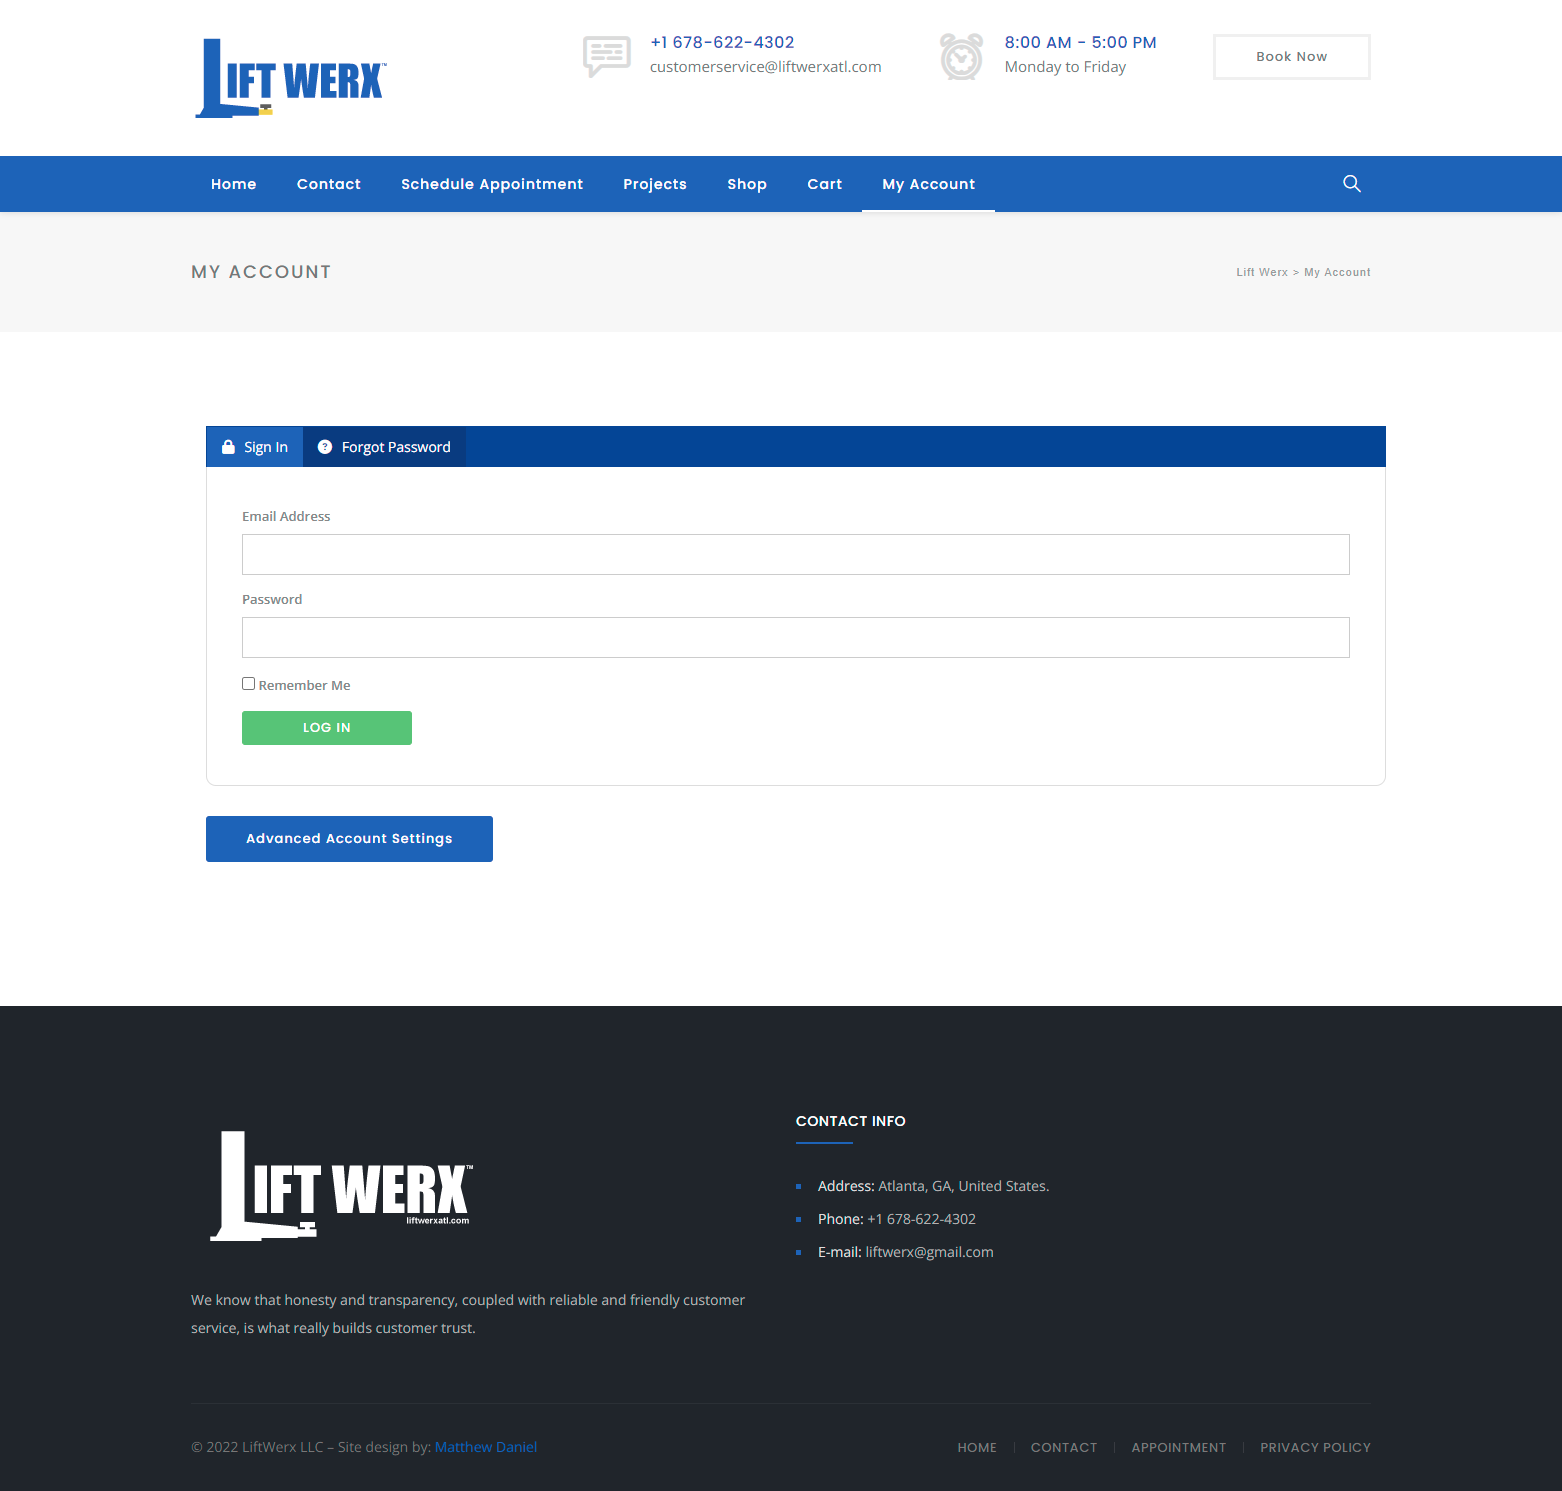 account log in screenshot from the Lift Werx website on the desktop experience